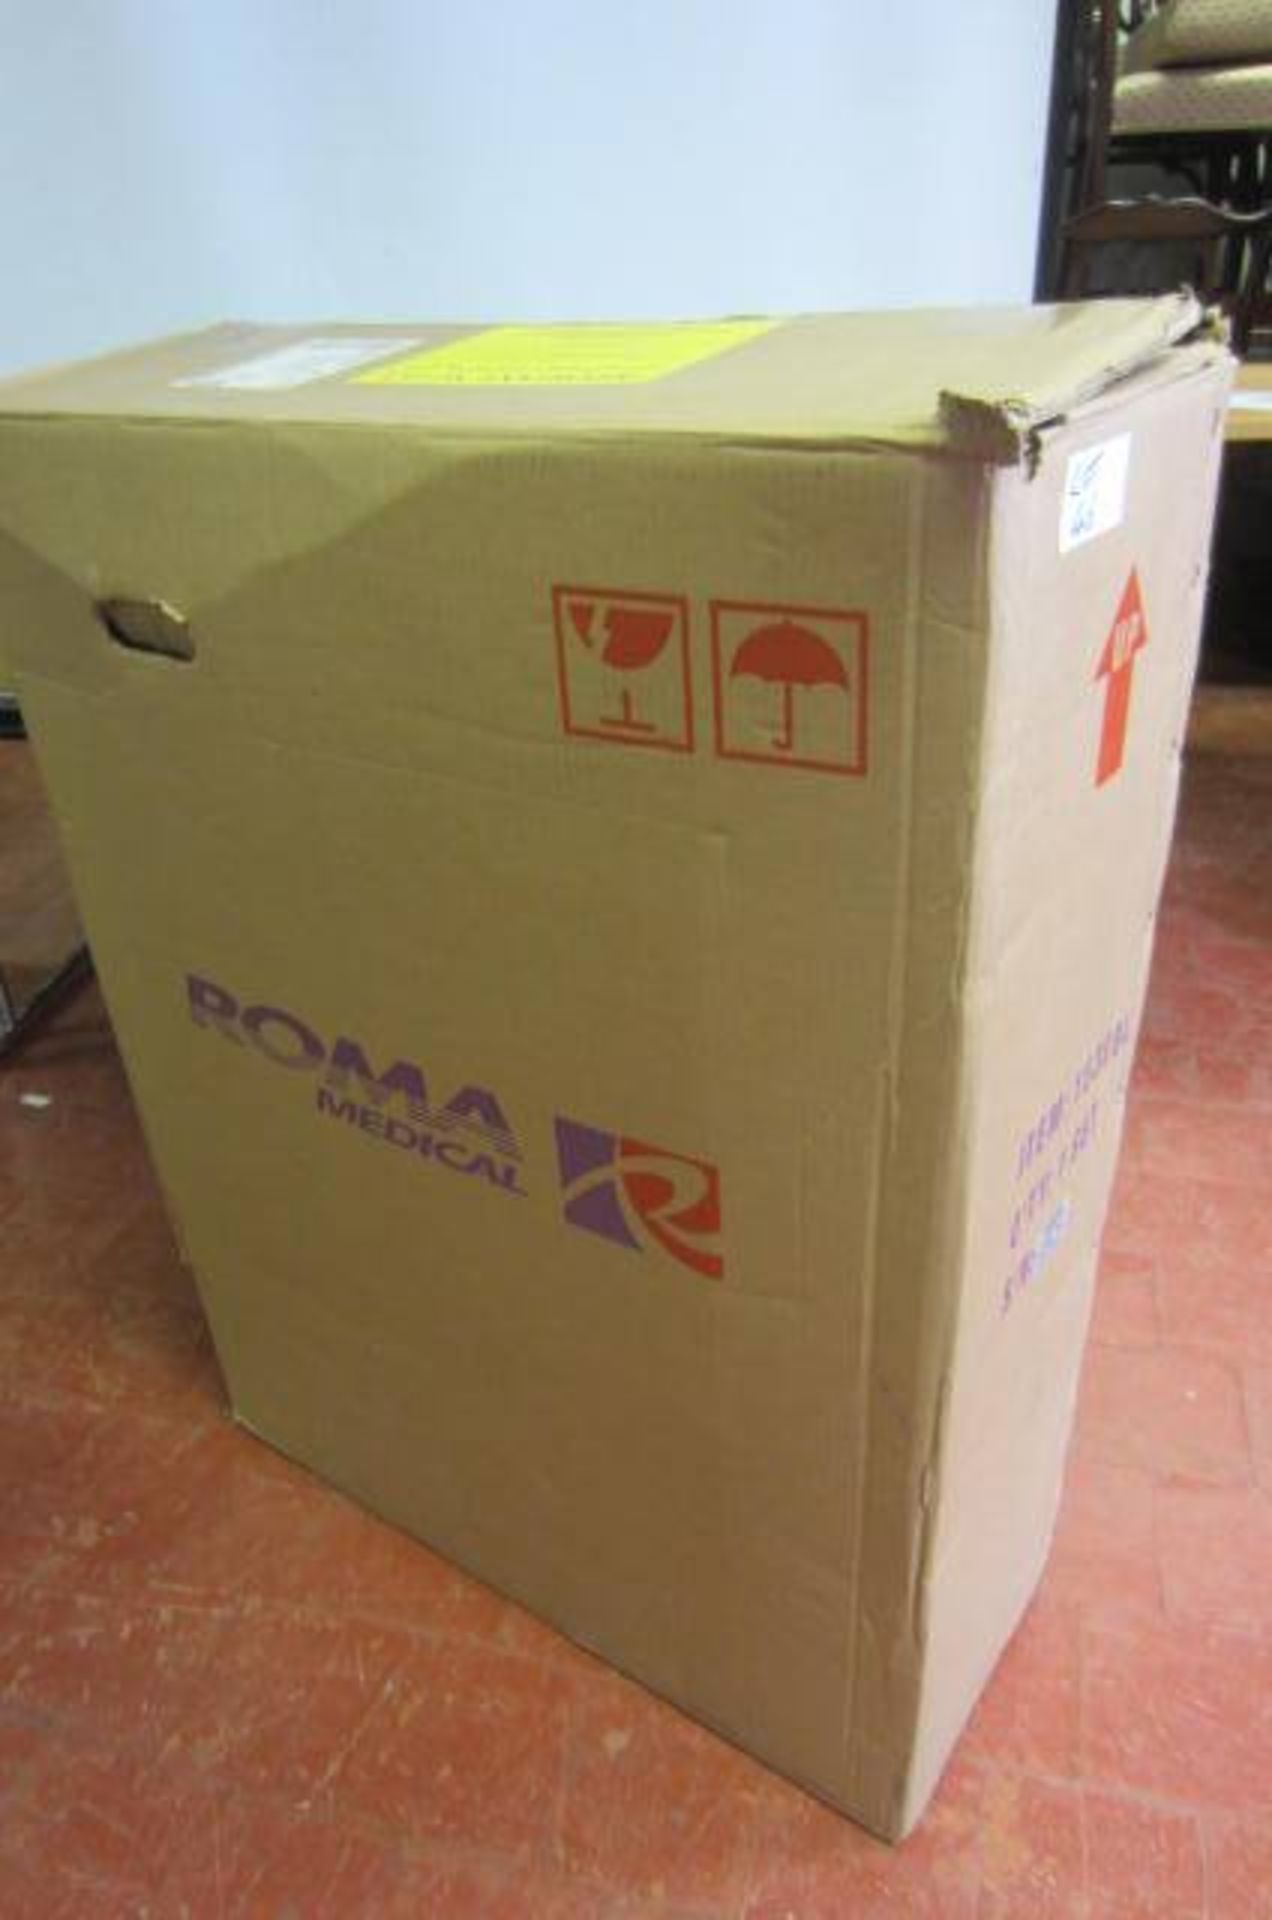 Roma Medical Lightweight Car Transit Wheel Chair, Model 1530BL. In Box As New. RRP £255.00 - Image 3 of 3